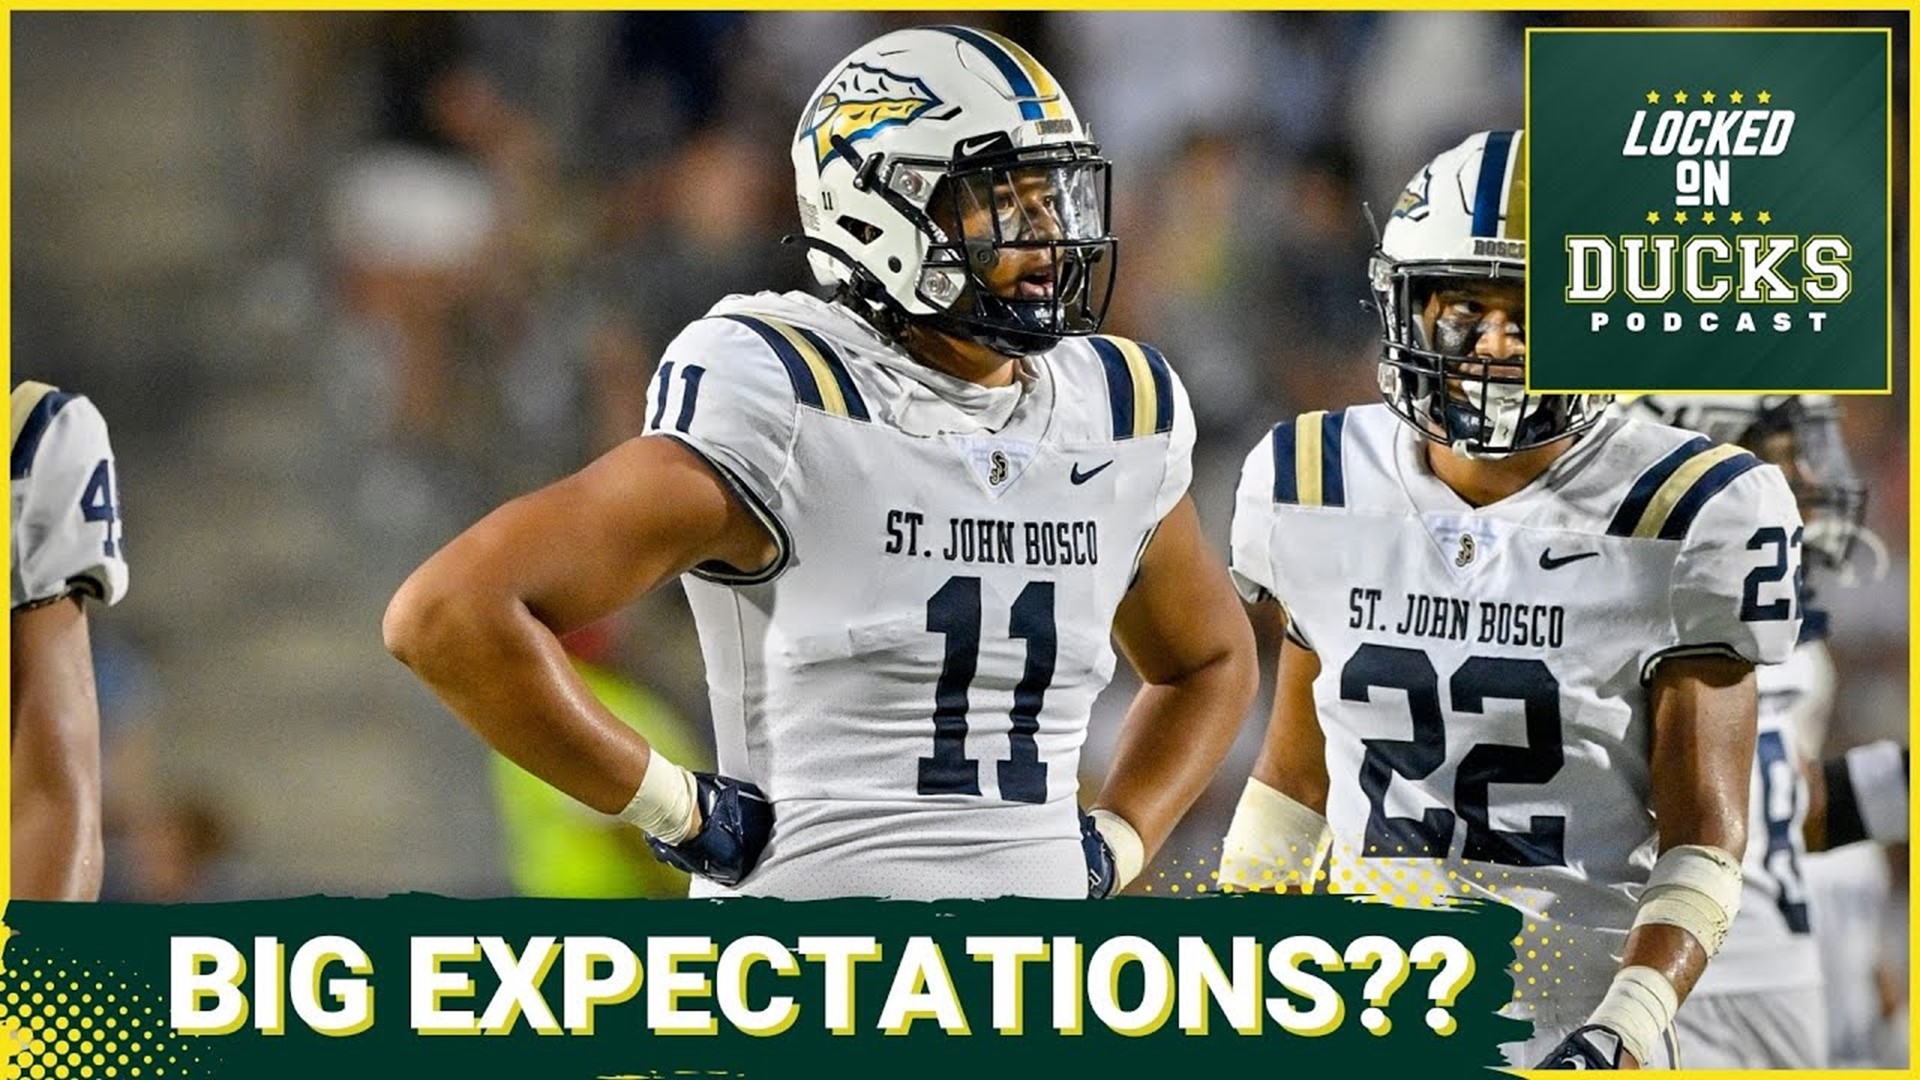 With so many incoming true freshman on the defensive line, what should Oregon fans expect from that position group?